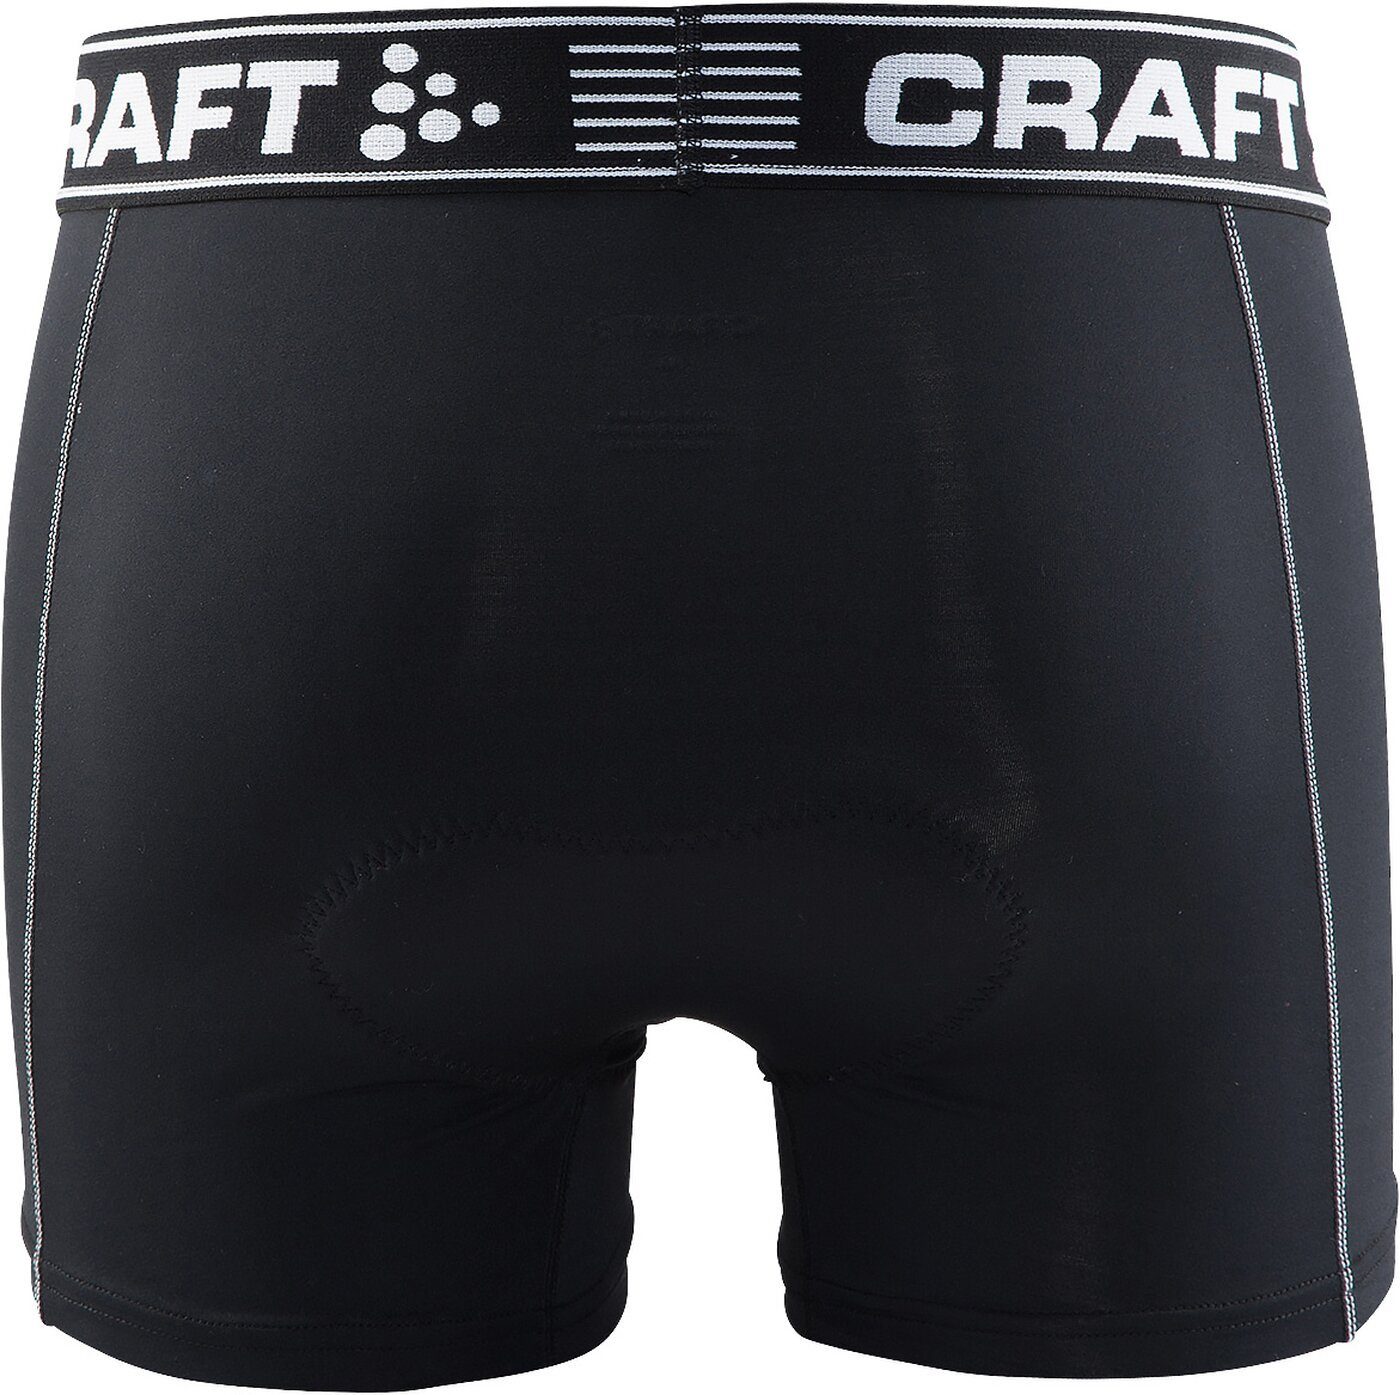 Craft Funktionsboxer Core Bike BLACK/WHITE Boxer Greatness M